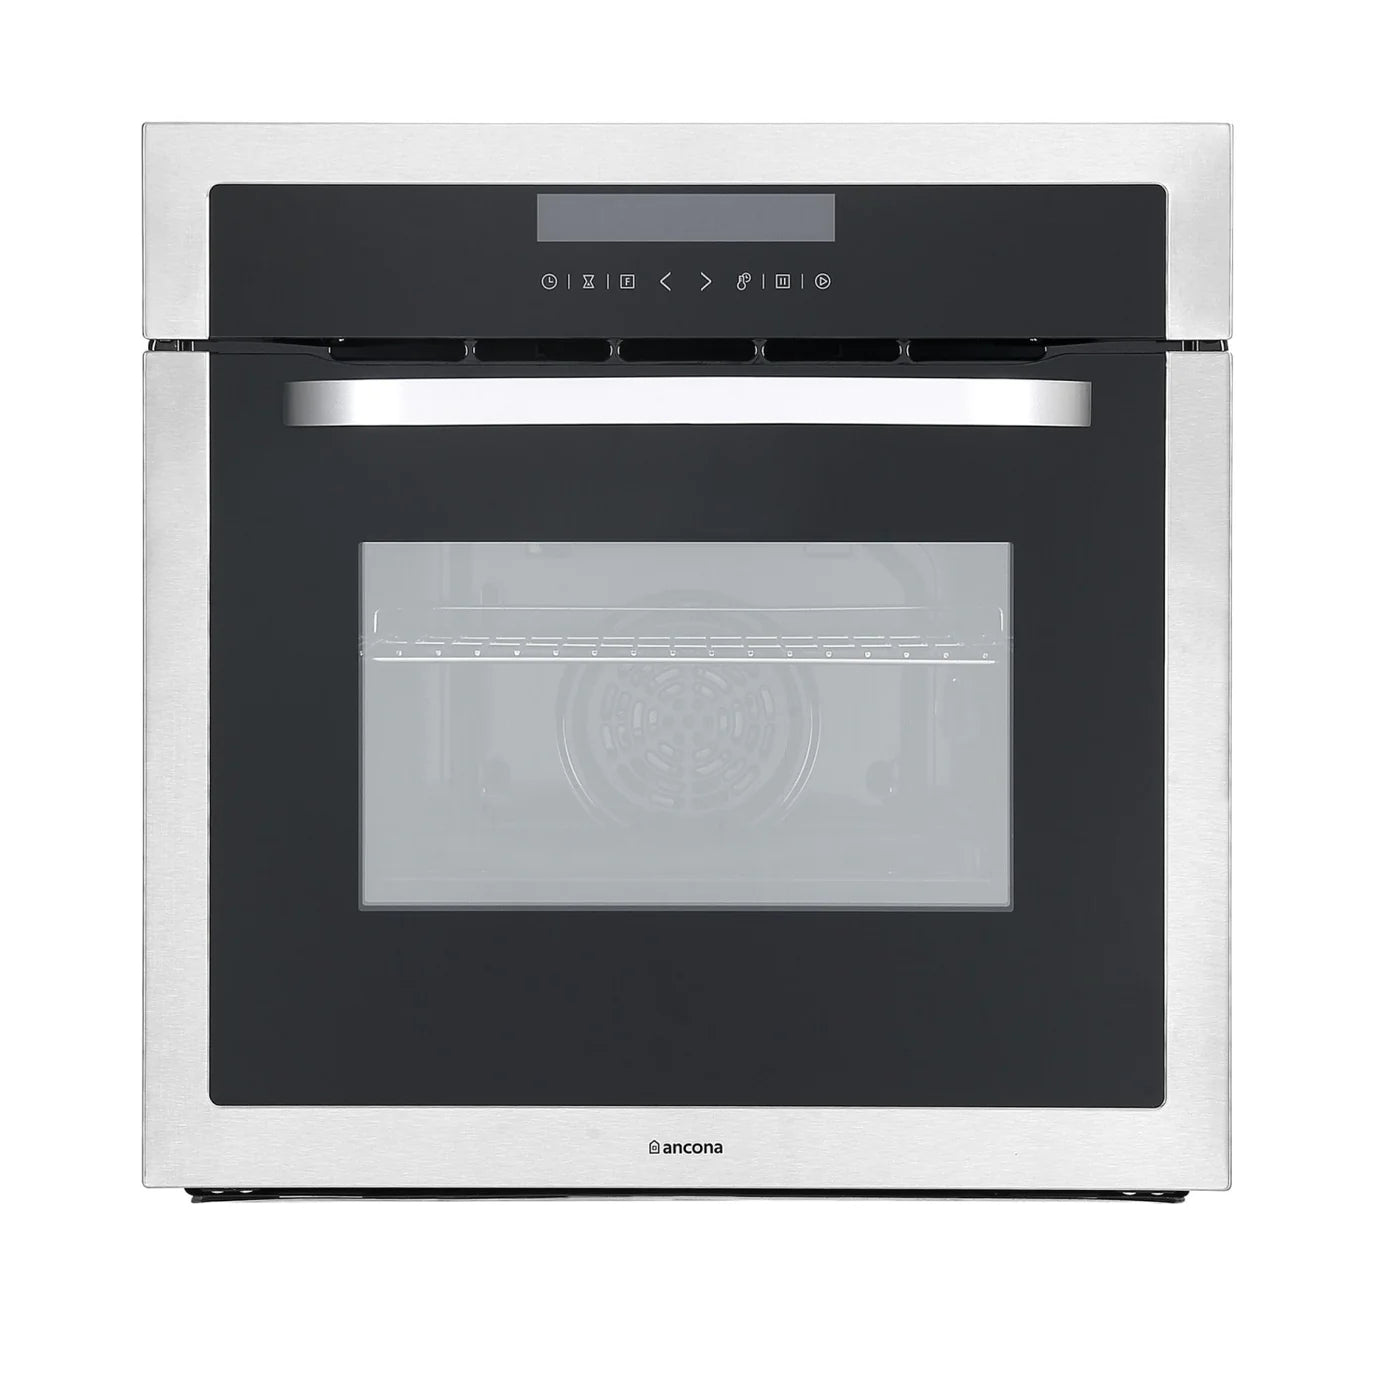 AN-2310SS - WALL OVENS - Ancona - Combination Oven - Stainless Steel - Open Box - WALL OVENS - BonPrix Électroménagers